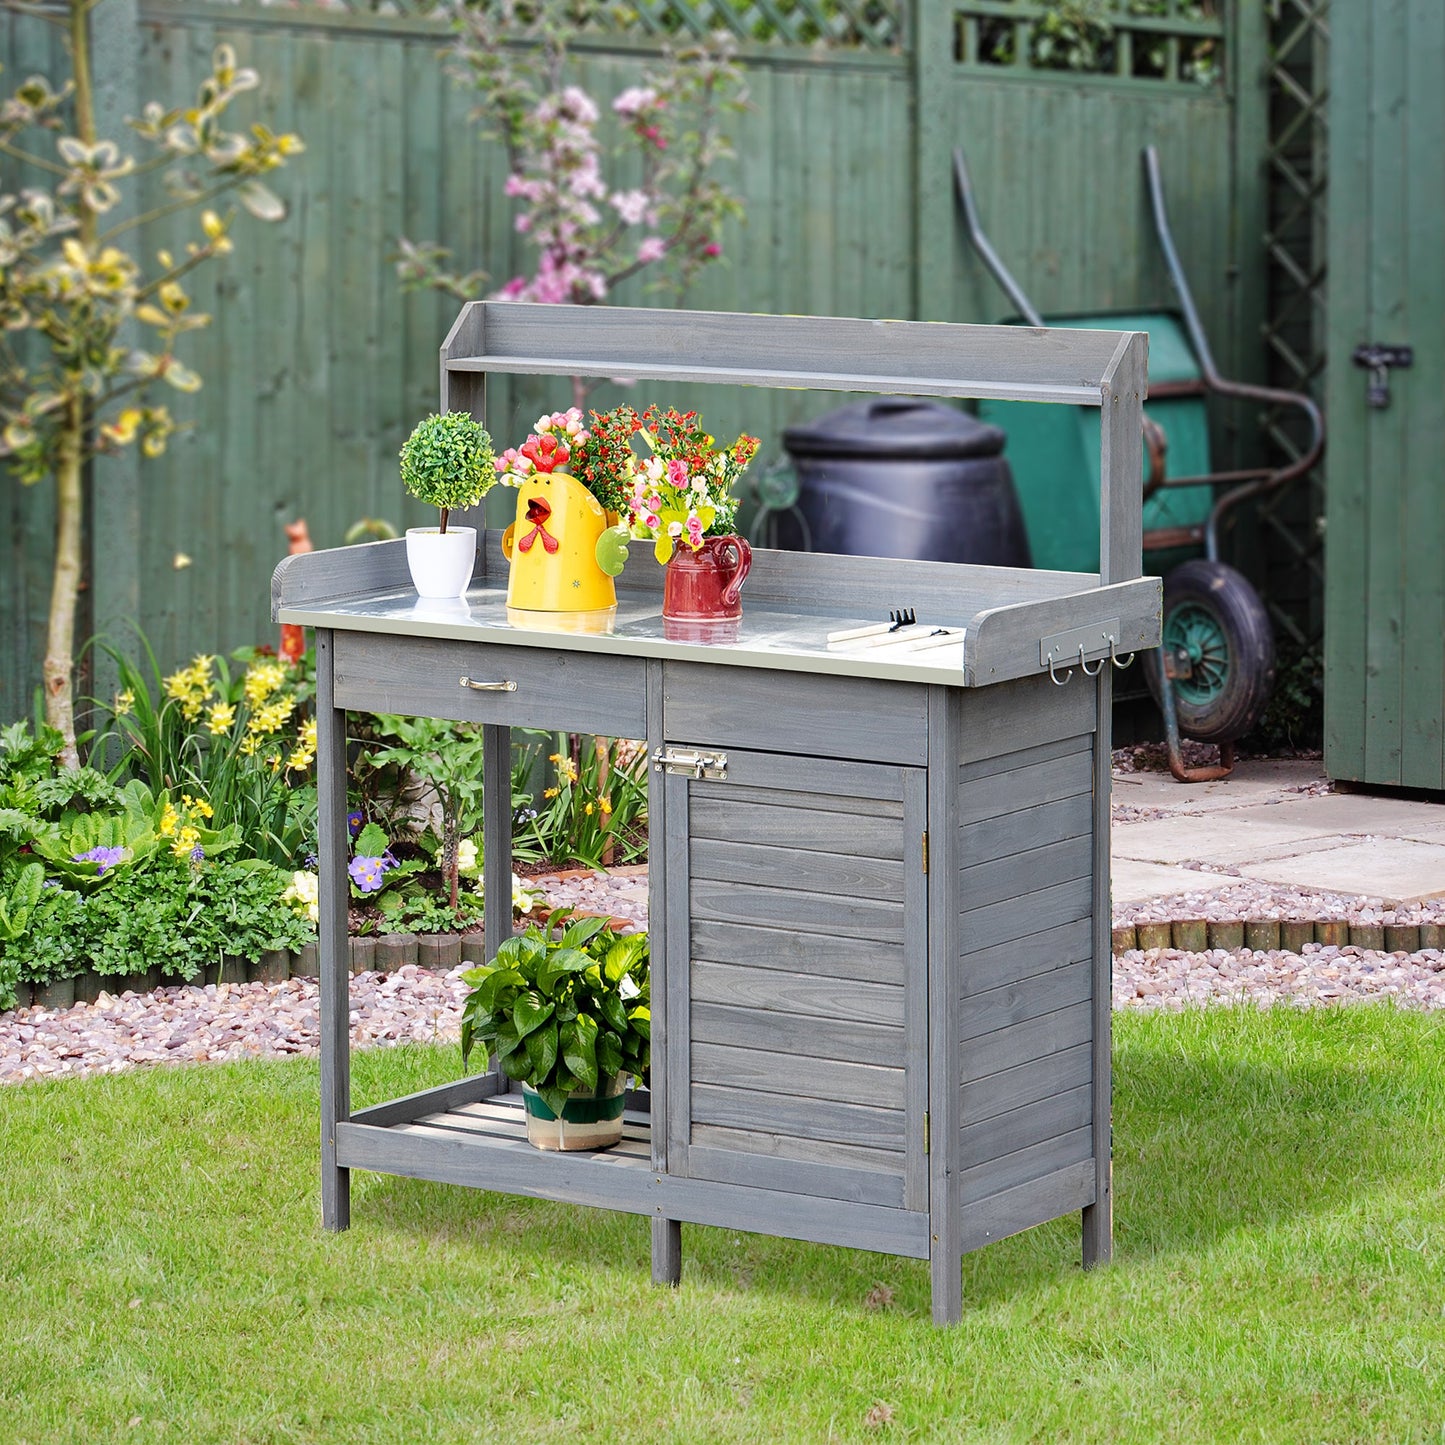 -Outsunny Potting Bench Table with Storage Cabinet and Open Shelf, Garden Planting Workstation with Steel Tabletop, Grey - Outdoor Style Company